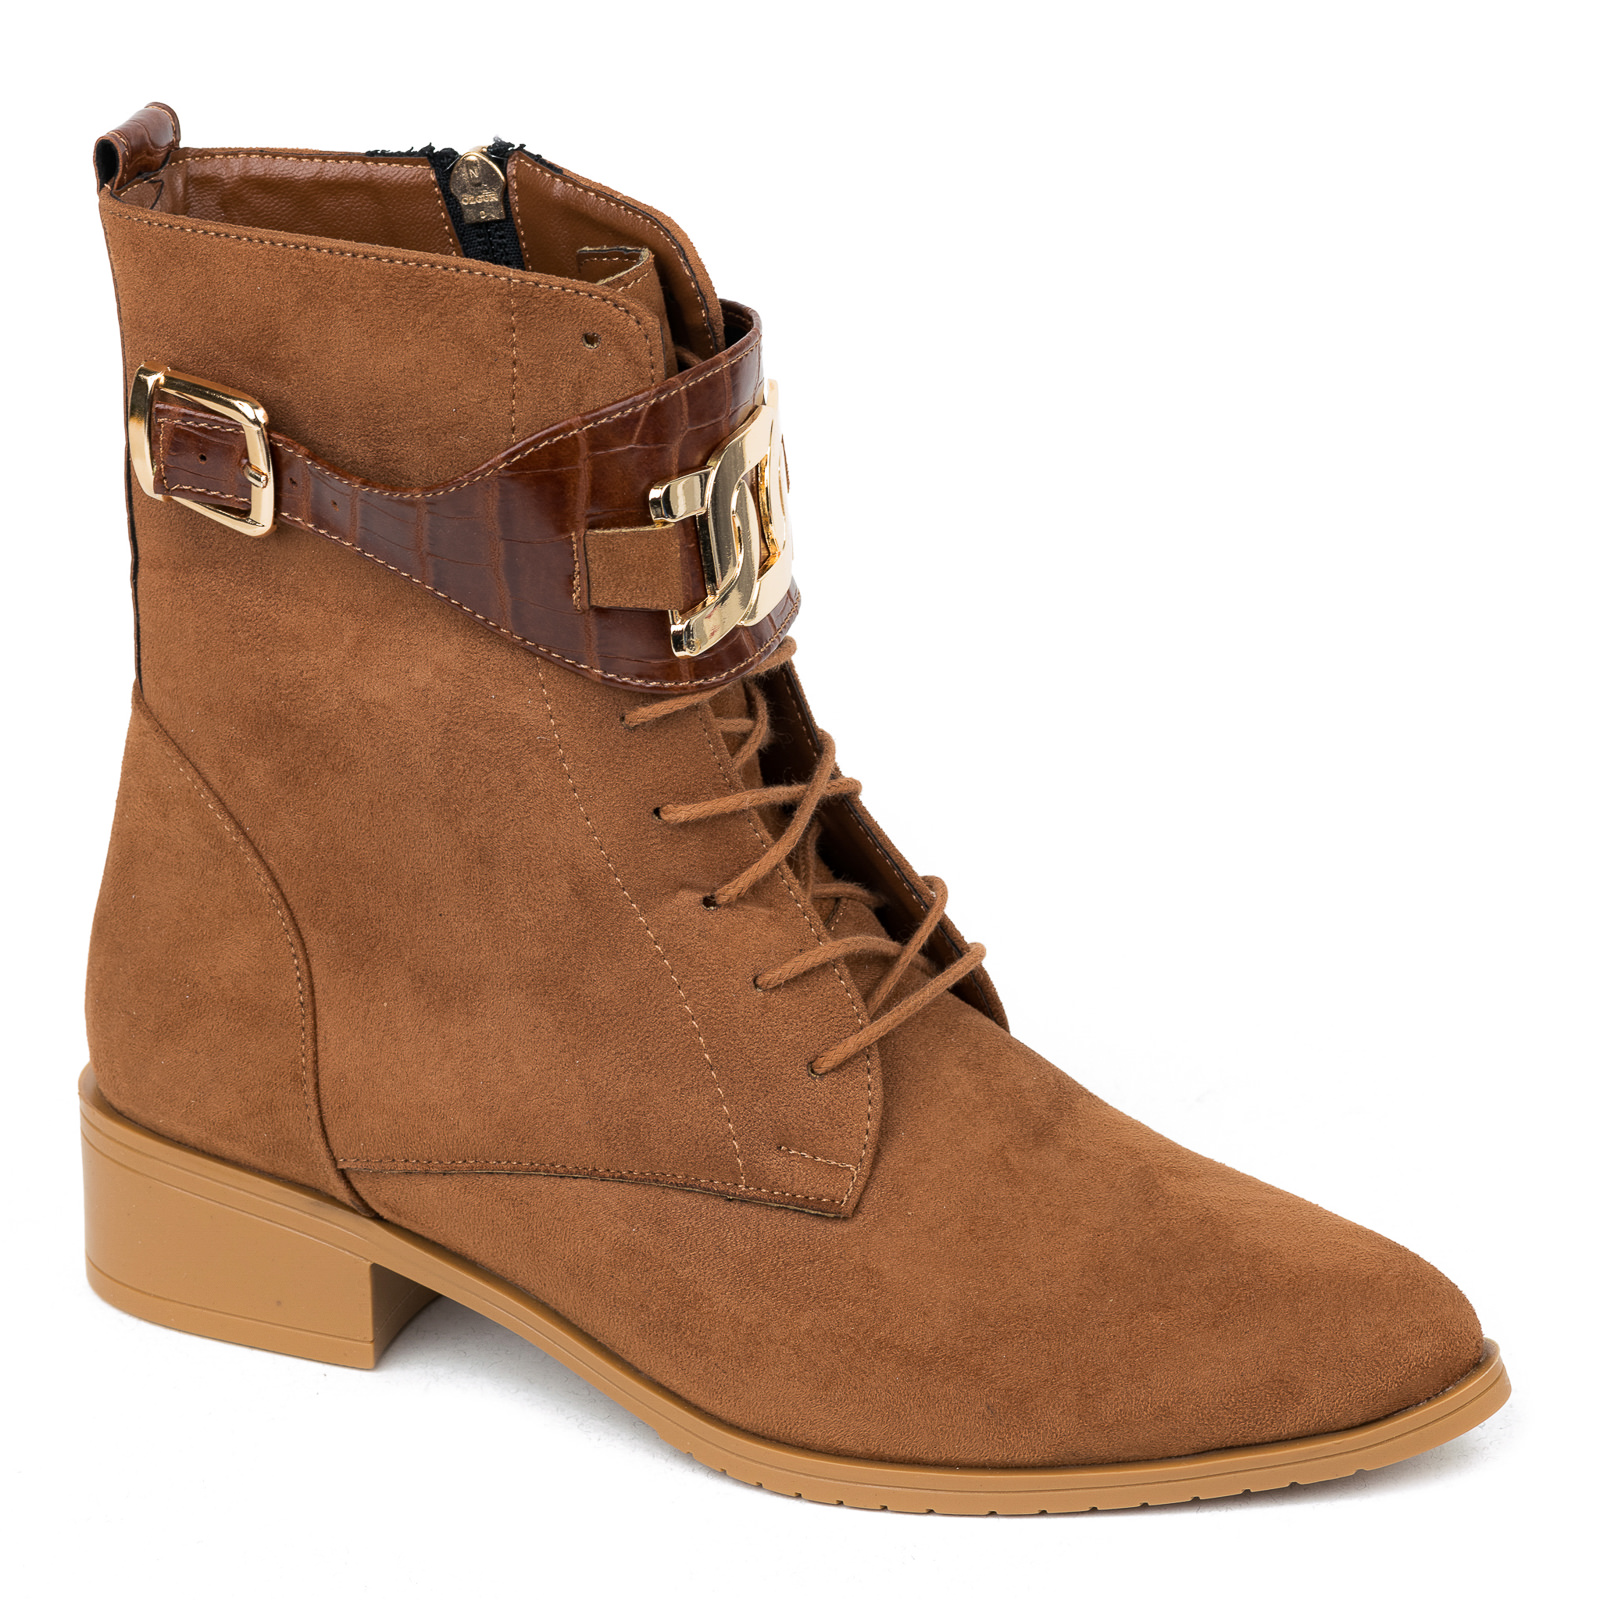 Women ankle boots B412 - CAMEL